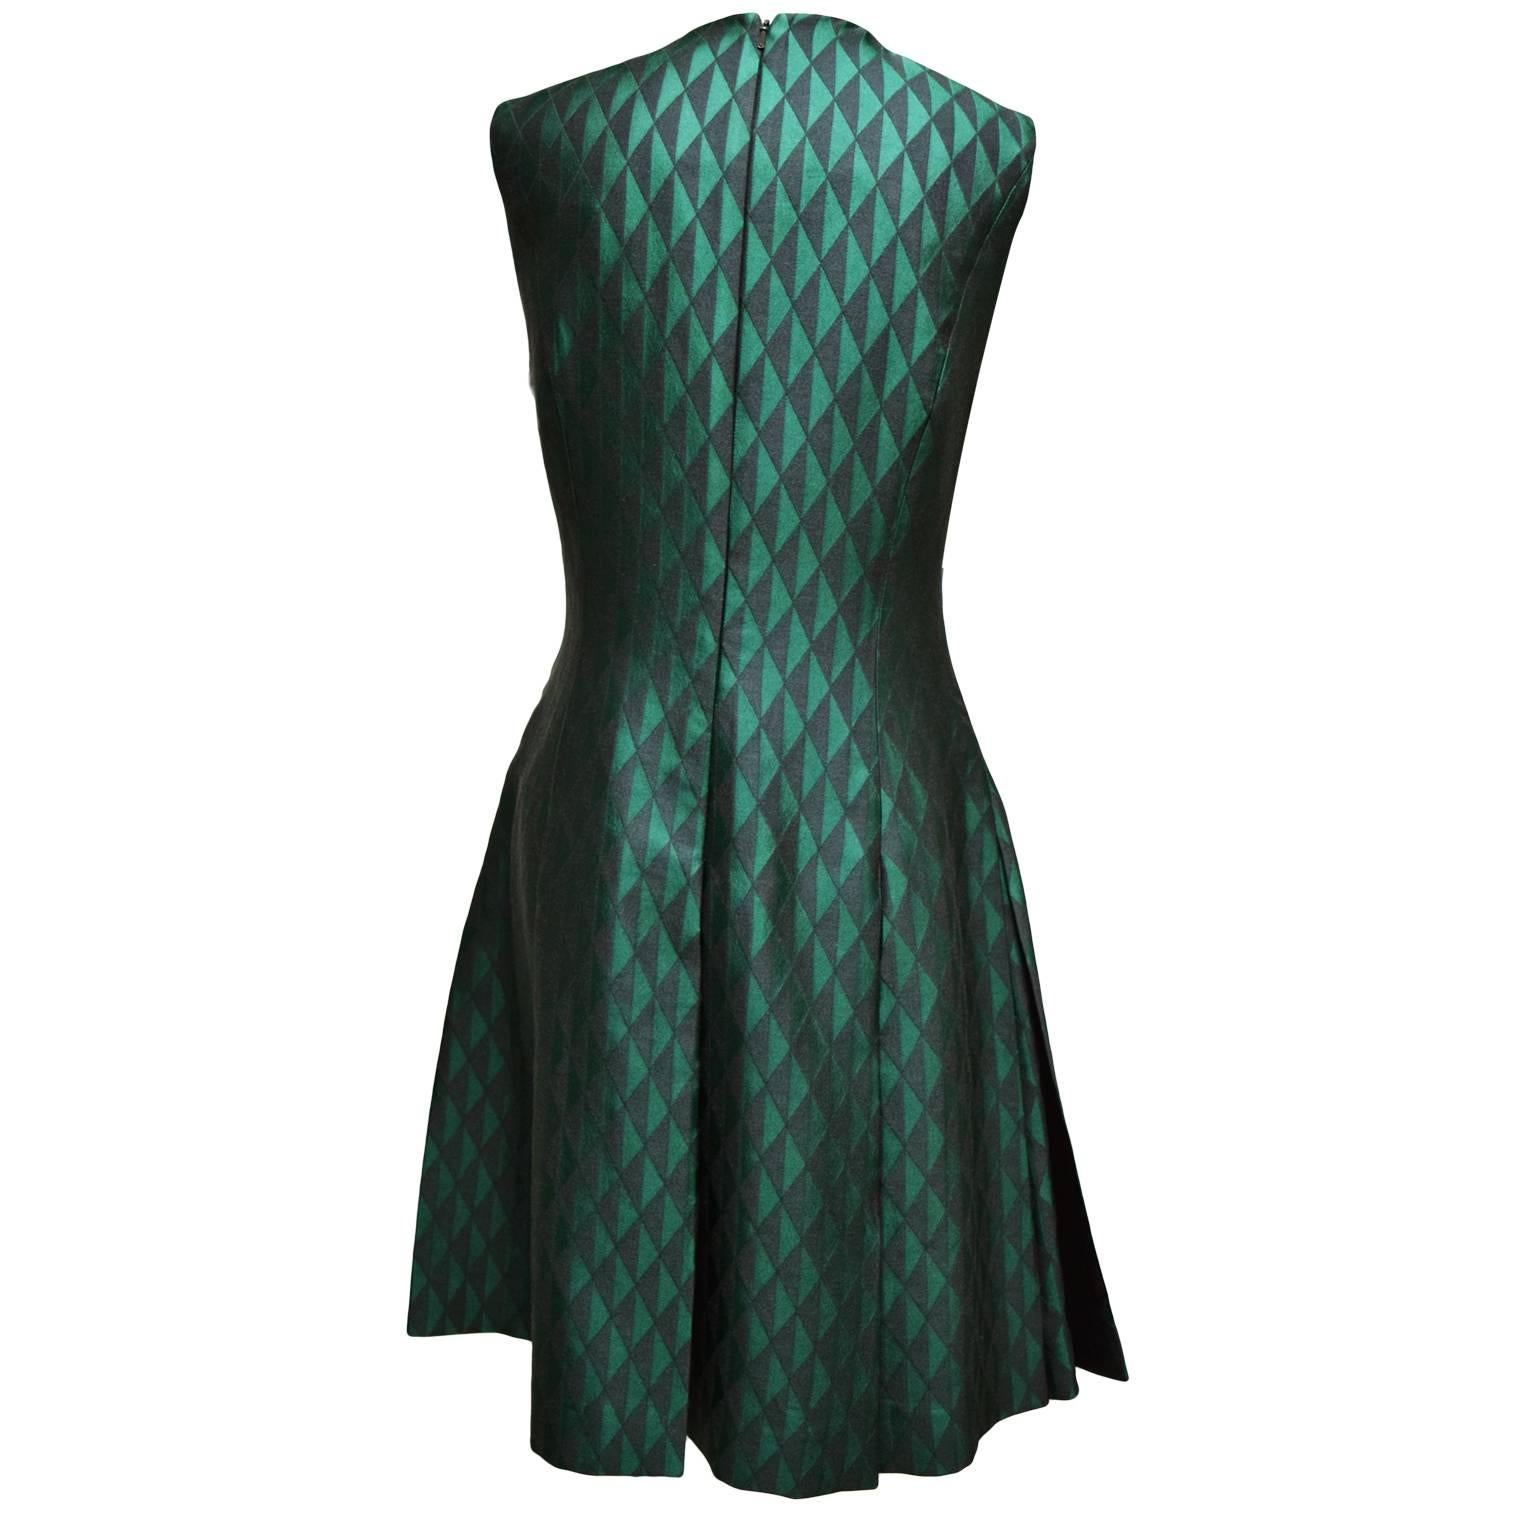 This gorgeous dress by Jonathan Saunders is a wool, polyester, and silk blend. The print is a black and green iridescent argyle print and is fully lined. The front of the dress is a plunging neckline and has a zipped back closure. The skirt of the